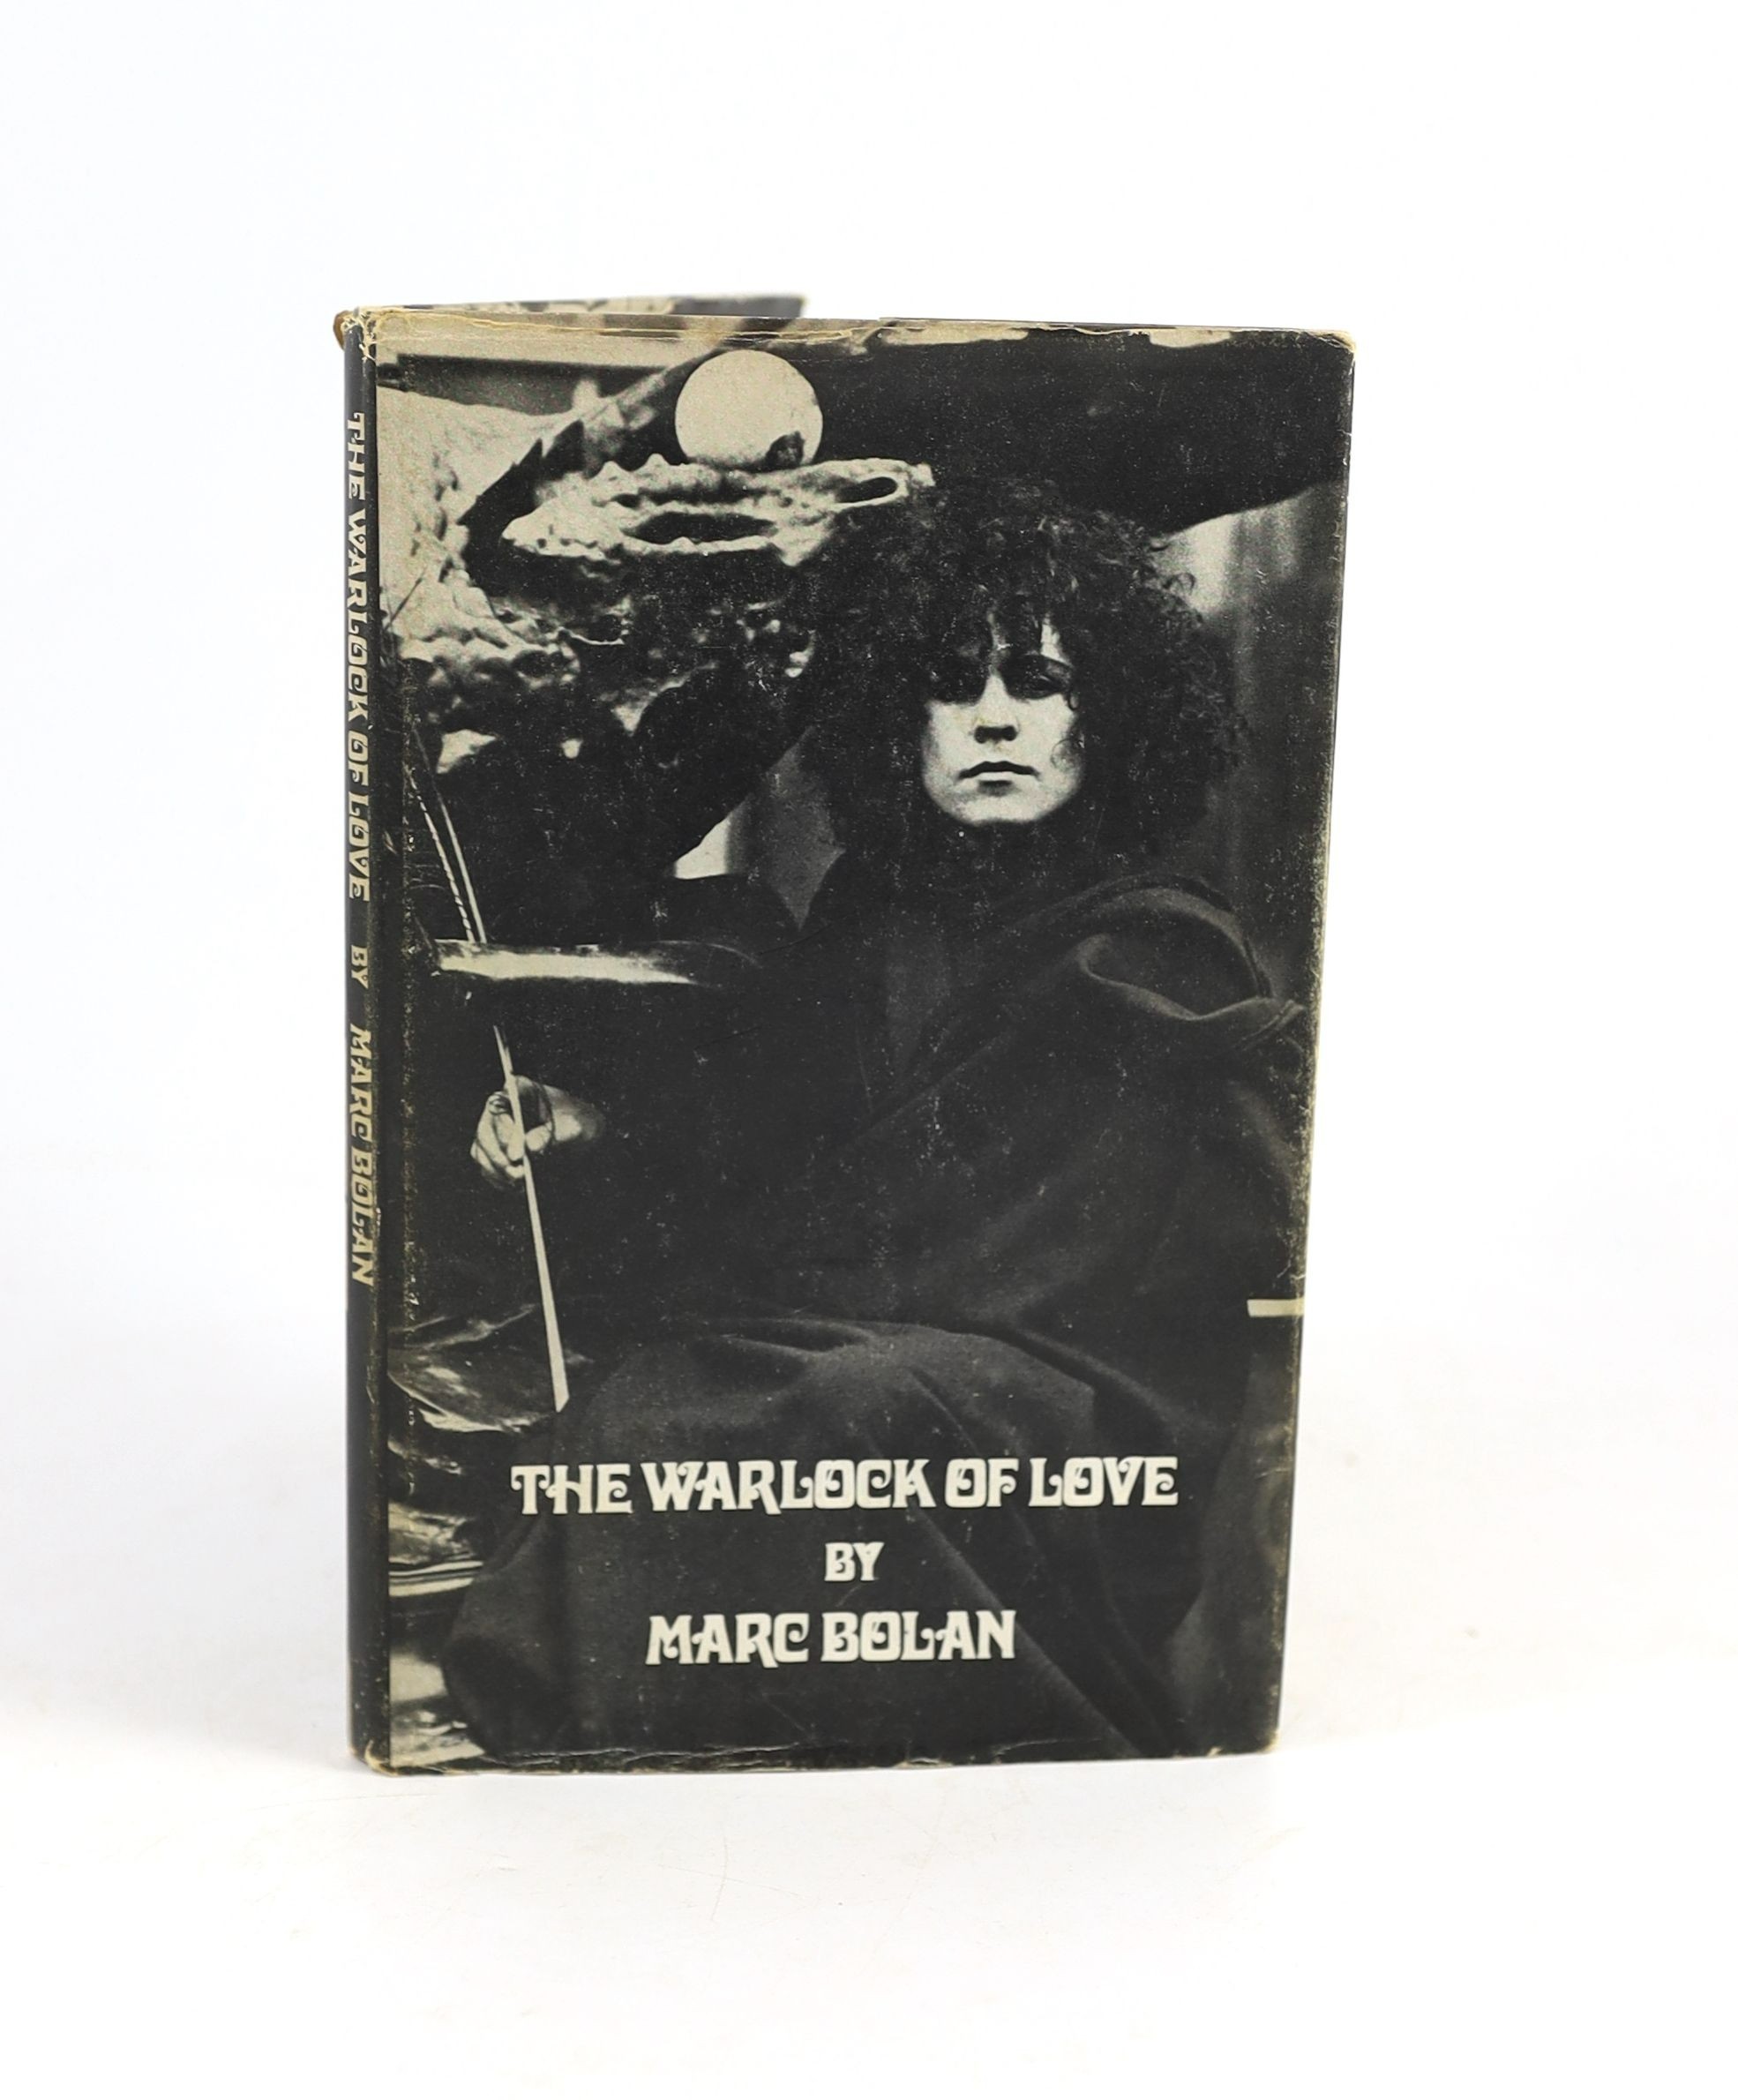 Bolan, Marc - The Warlock of Love. 1st ed. Original pictorial printed boards with unclipped d/j. 8vo. Lupus Music, Plymouth, 1969.